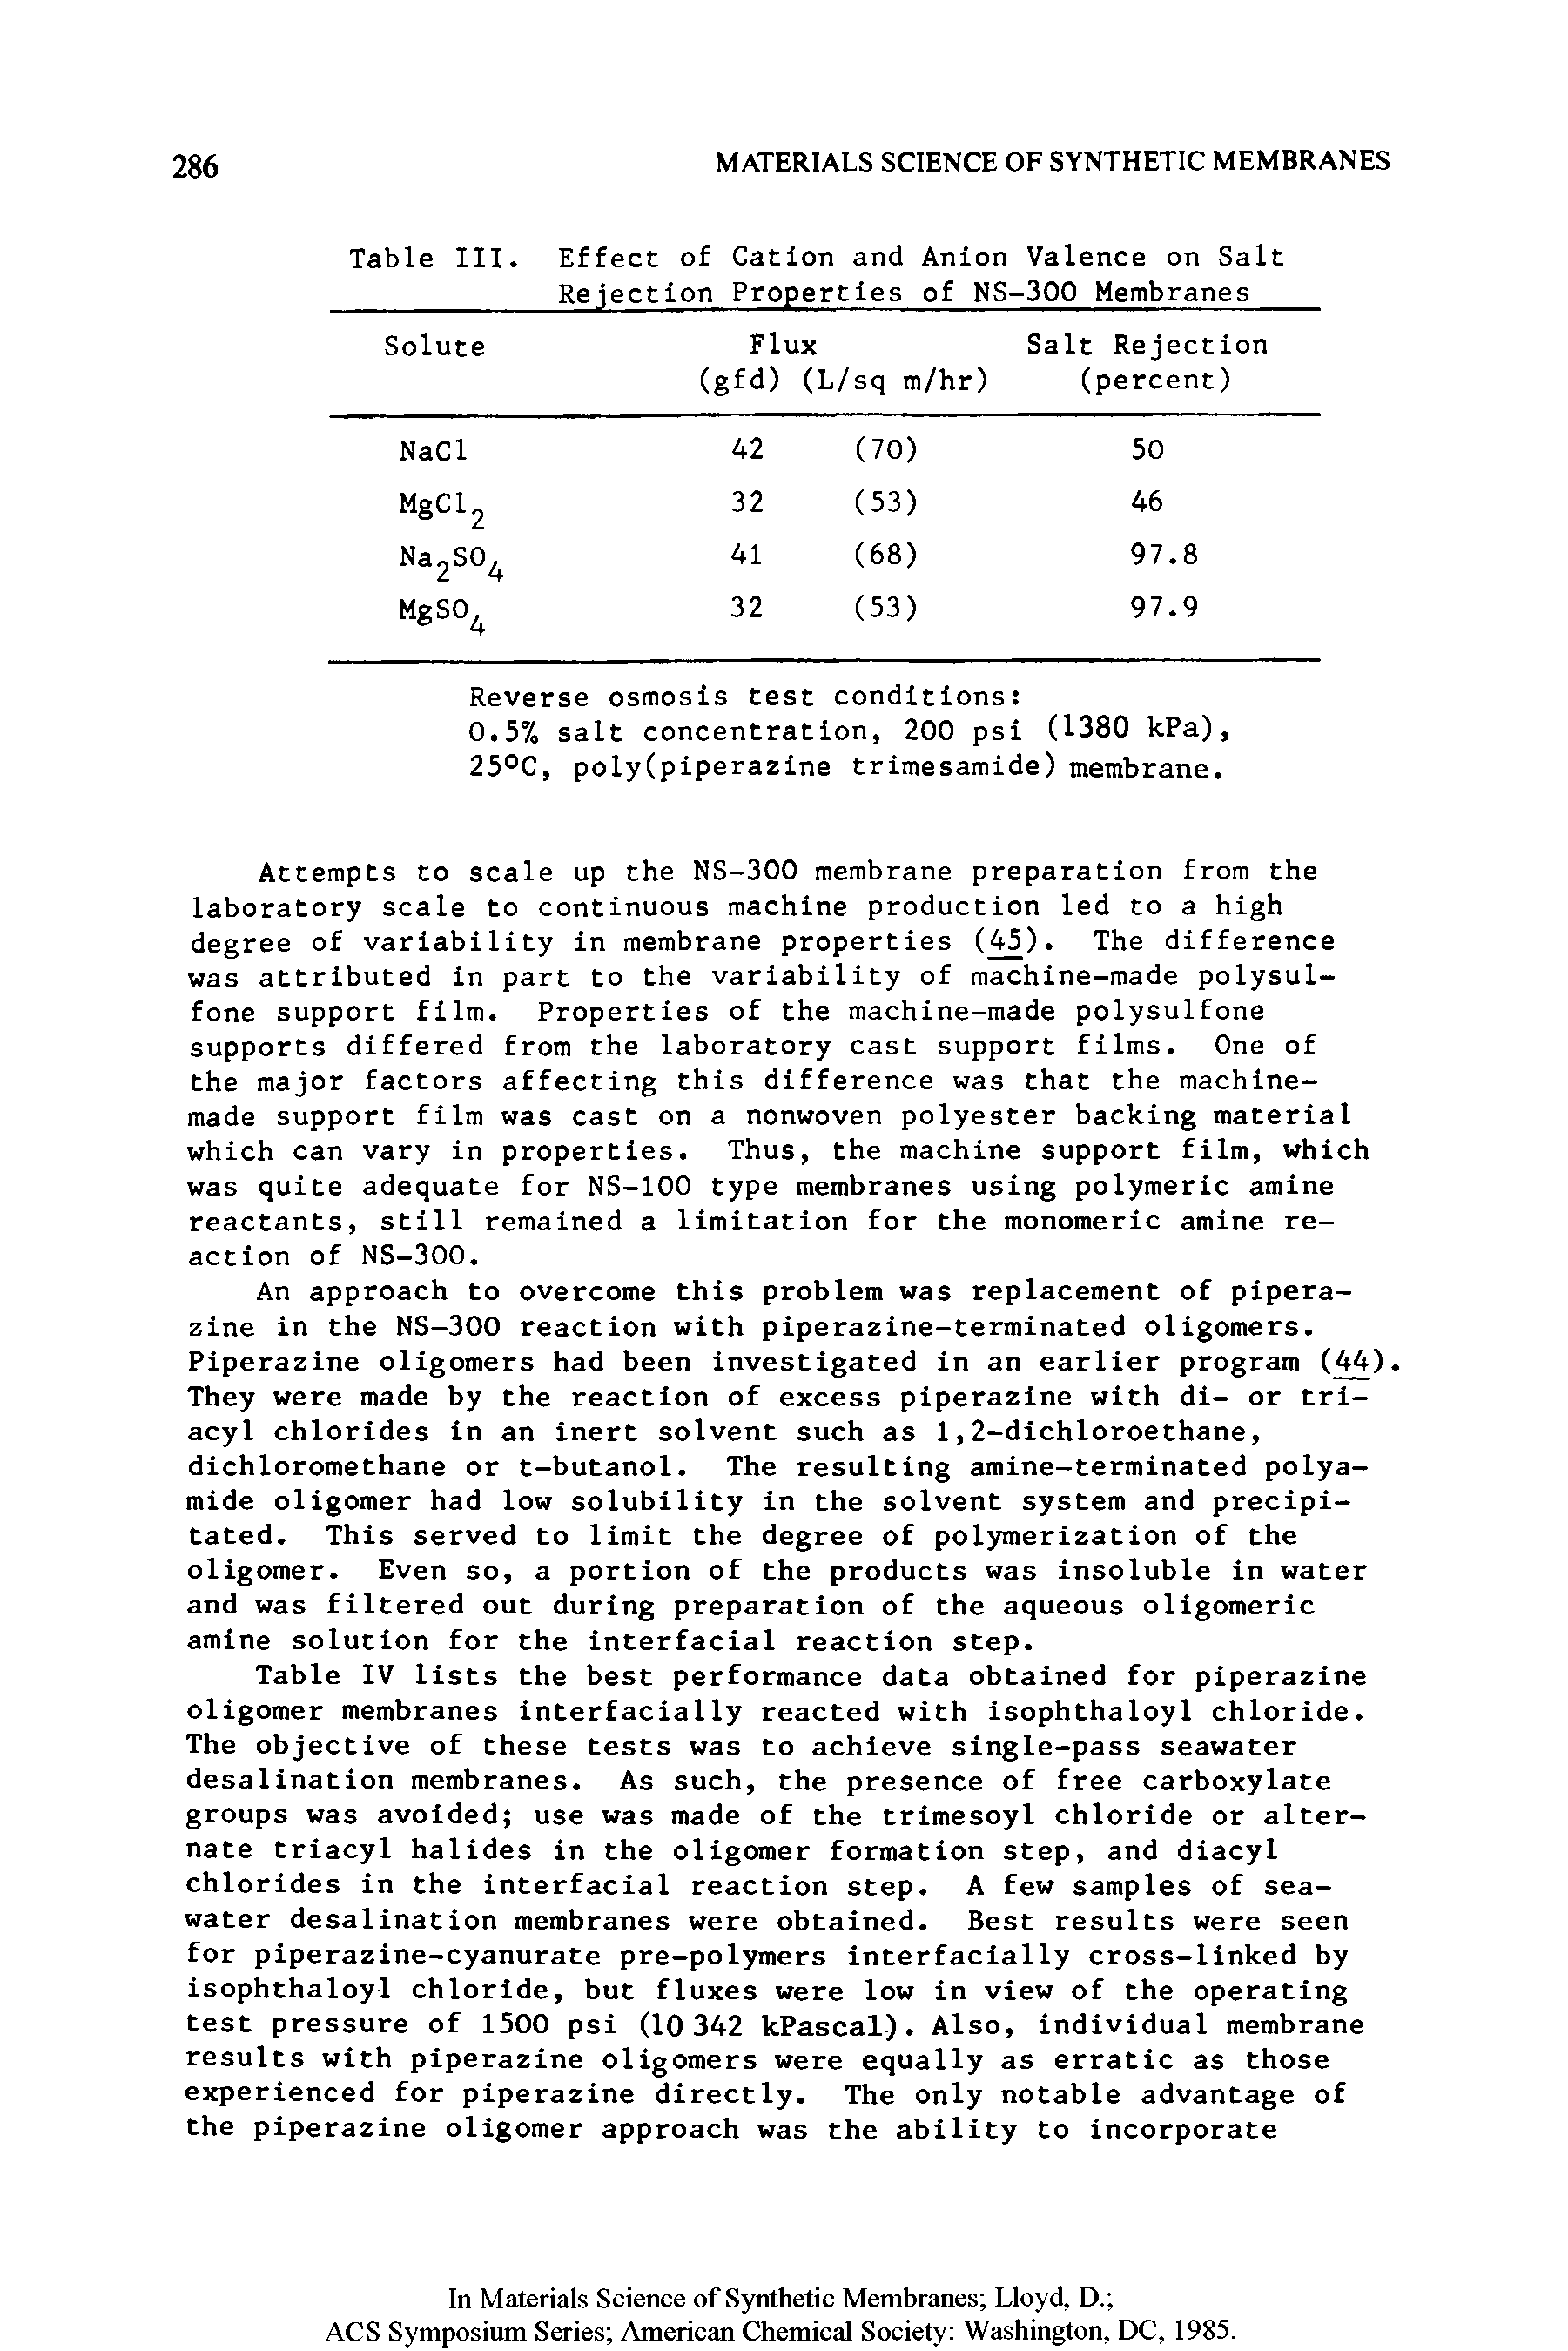 Table IV lists the best performance data obtained for piperazine oligomer membranes interfacially reacted with isophthaloyl chloride. The objective of these tests was to achieve single-pass seawater desalination membranes. As such, the presence of free carboxylate groups was avoided use was made of the trimesoyl chloride or alternate triacyl halides in the oligomer formation step, and diacyl chlorides in the interfacial reaction step. A few samples of seawater desalination membranes were obtained. Best results were seen for piperazine-cyanurate pre-polymers interfacially cross-linked by isophthaloyl chloride, but fluxes were low in view of the operating test pressure of 1500 psi (10 342 kPascal). Also, individual membrane results with piperazine oligomers were equally as erratic as those experienced for piperazine directly. The only notable advantage of the piperazine oligomer approach was the ability to incorporate...